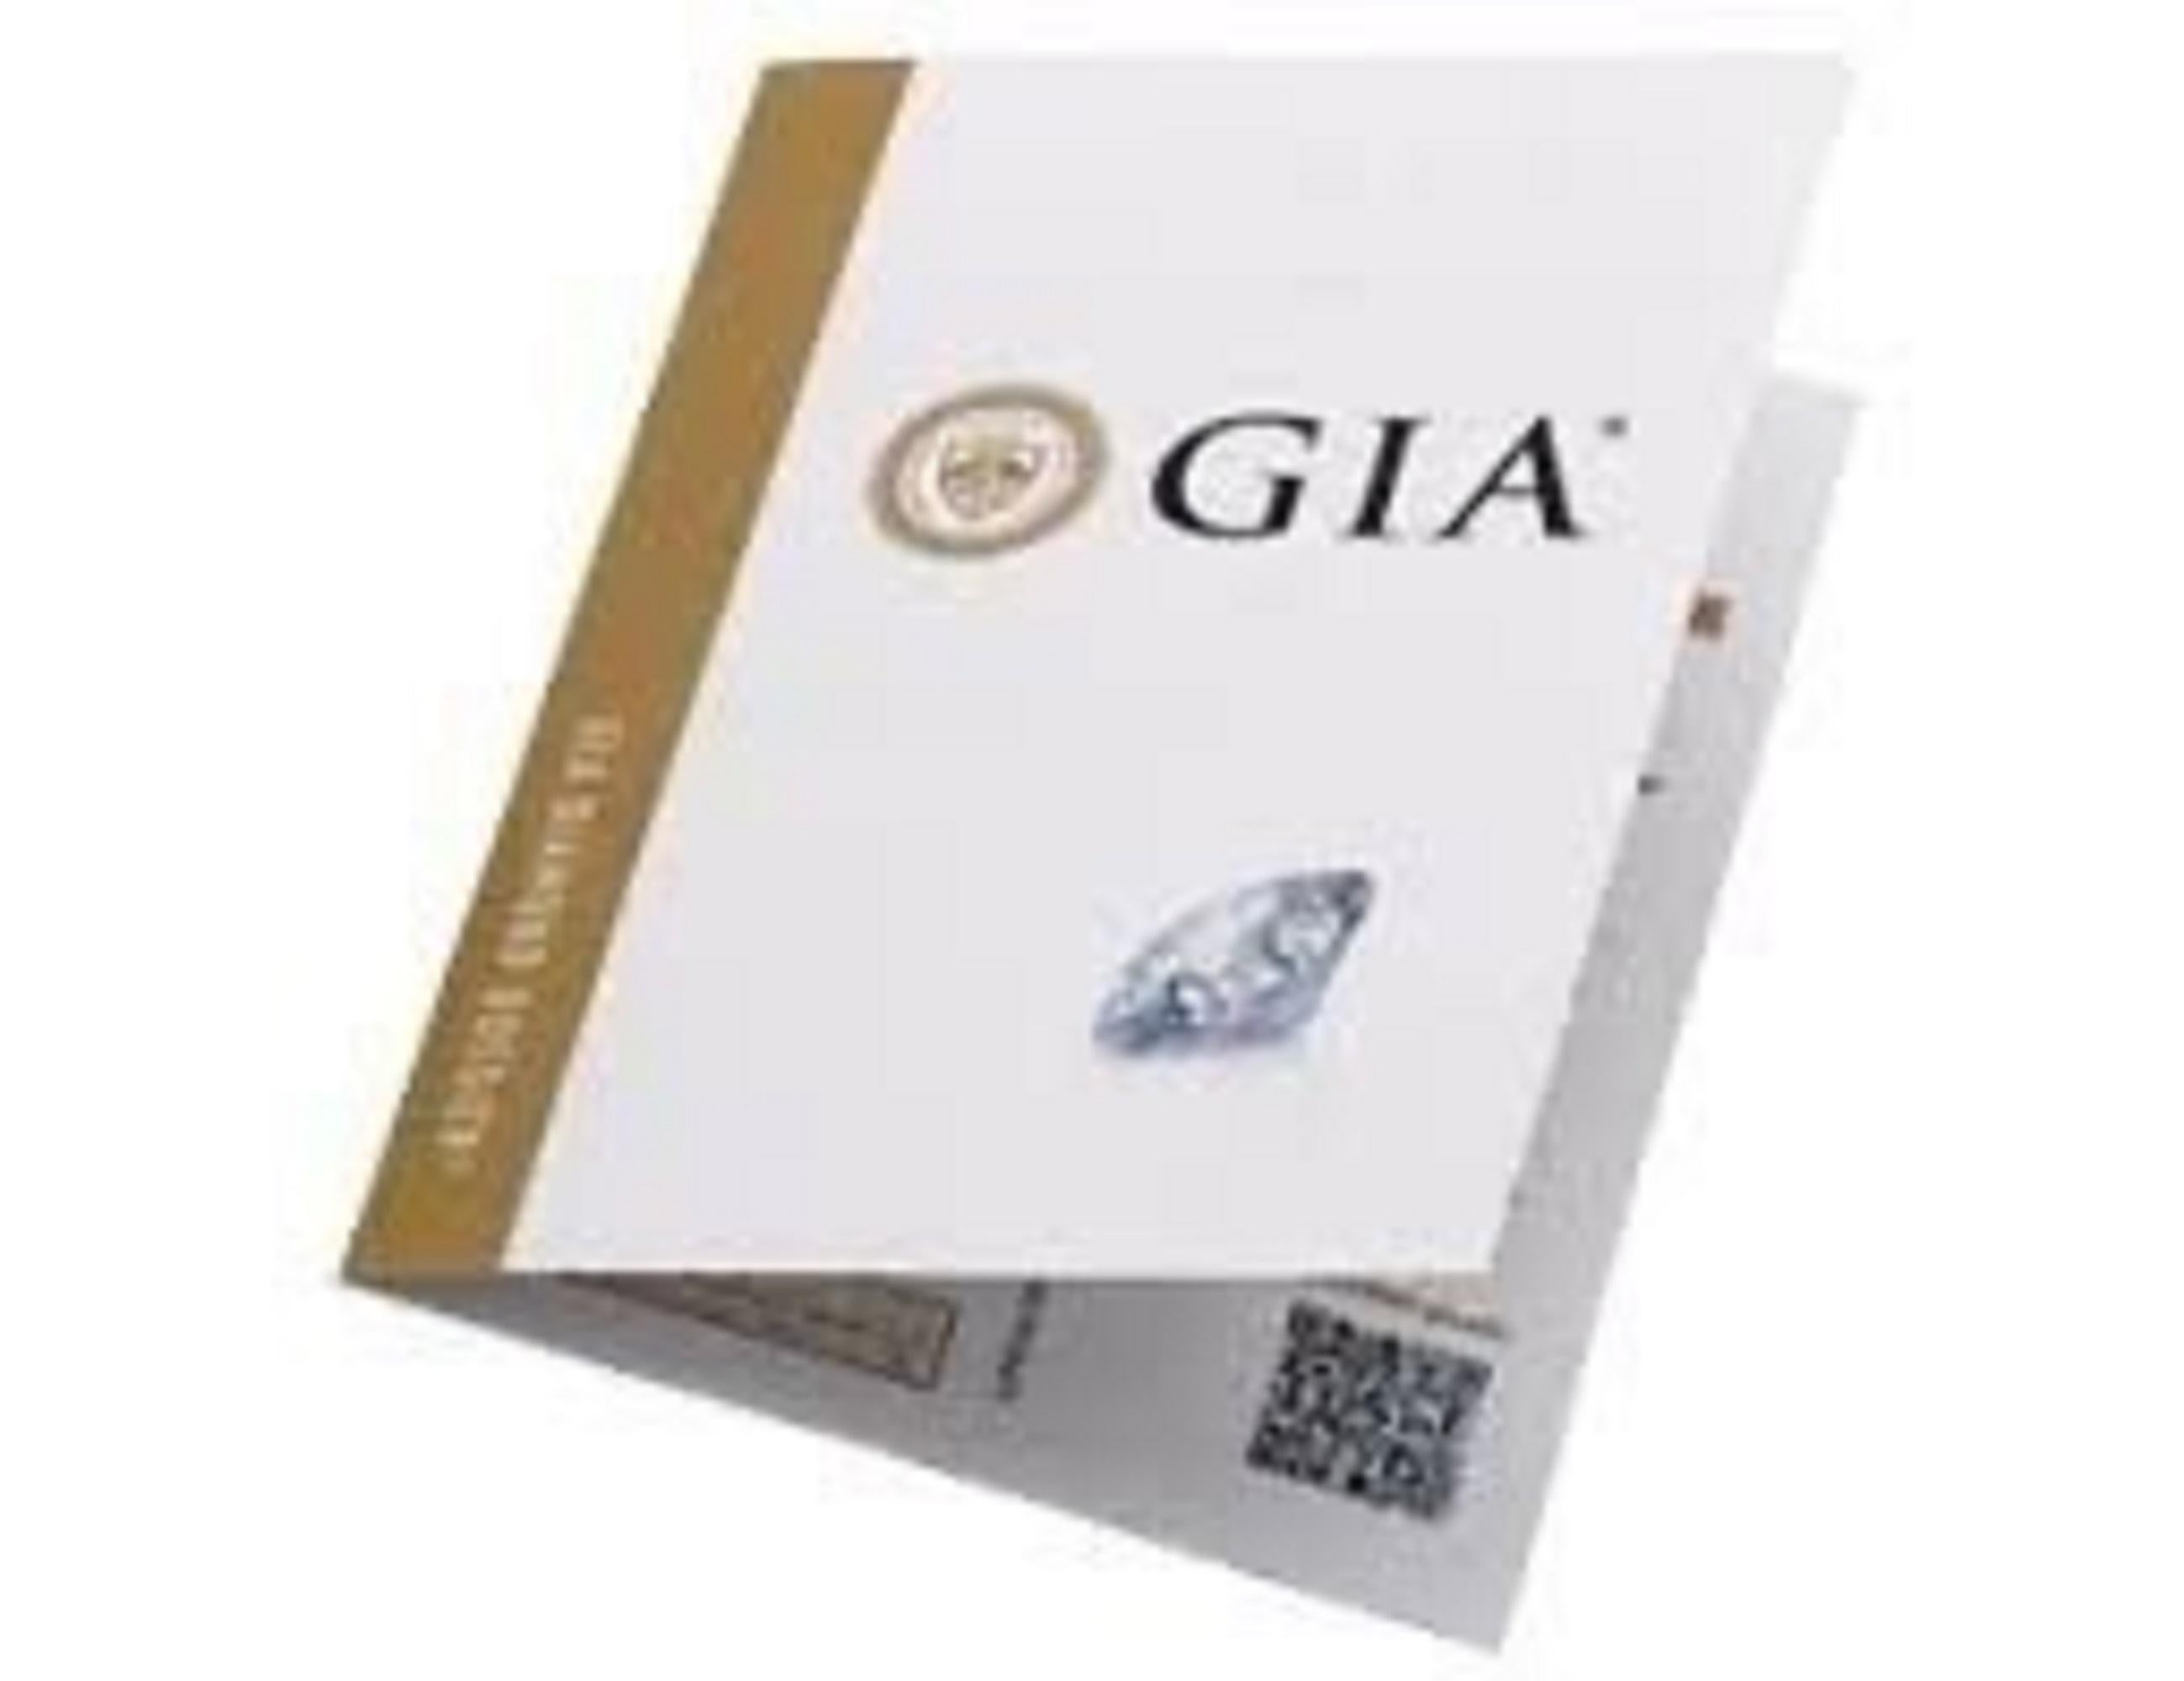 Dazzling 2 pcs Natural Diamonds with 1.41 ct Radiant D VVS1 GIA Certificate For Sale 5